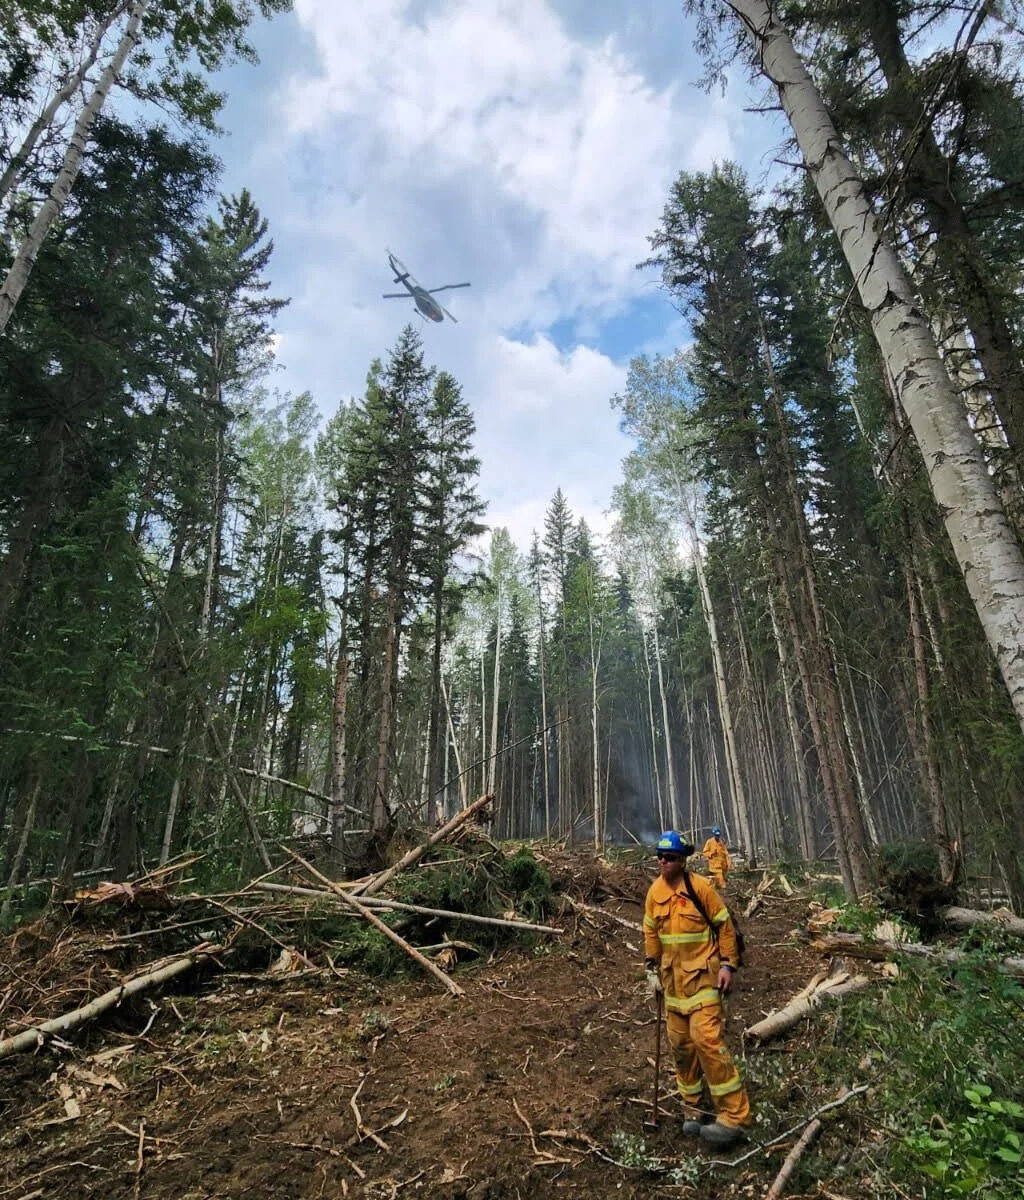 Two firefighters in a forest clearing with a helicopter overhead